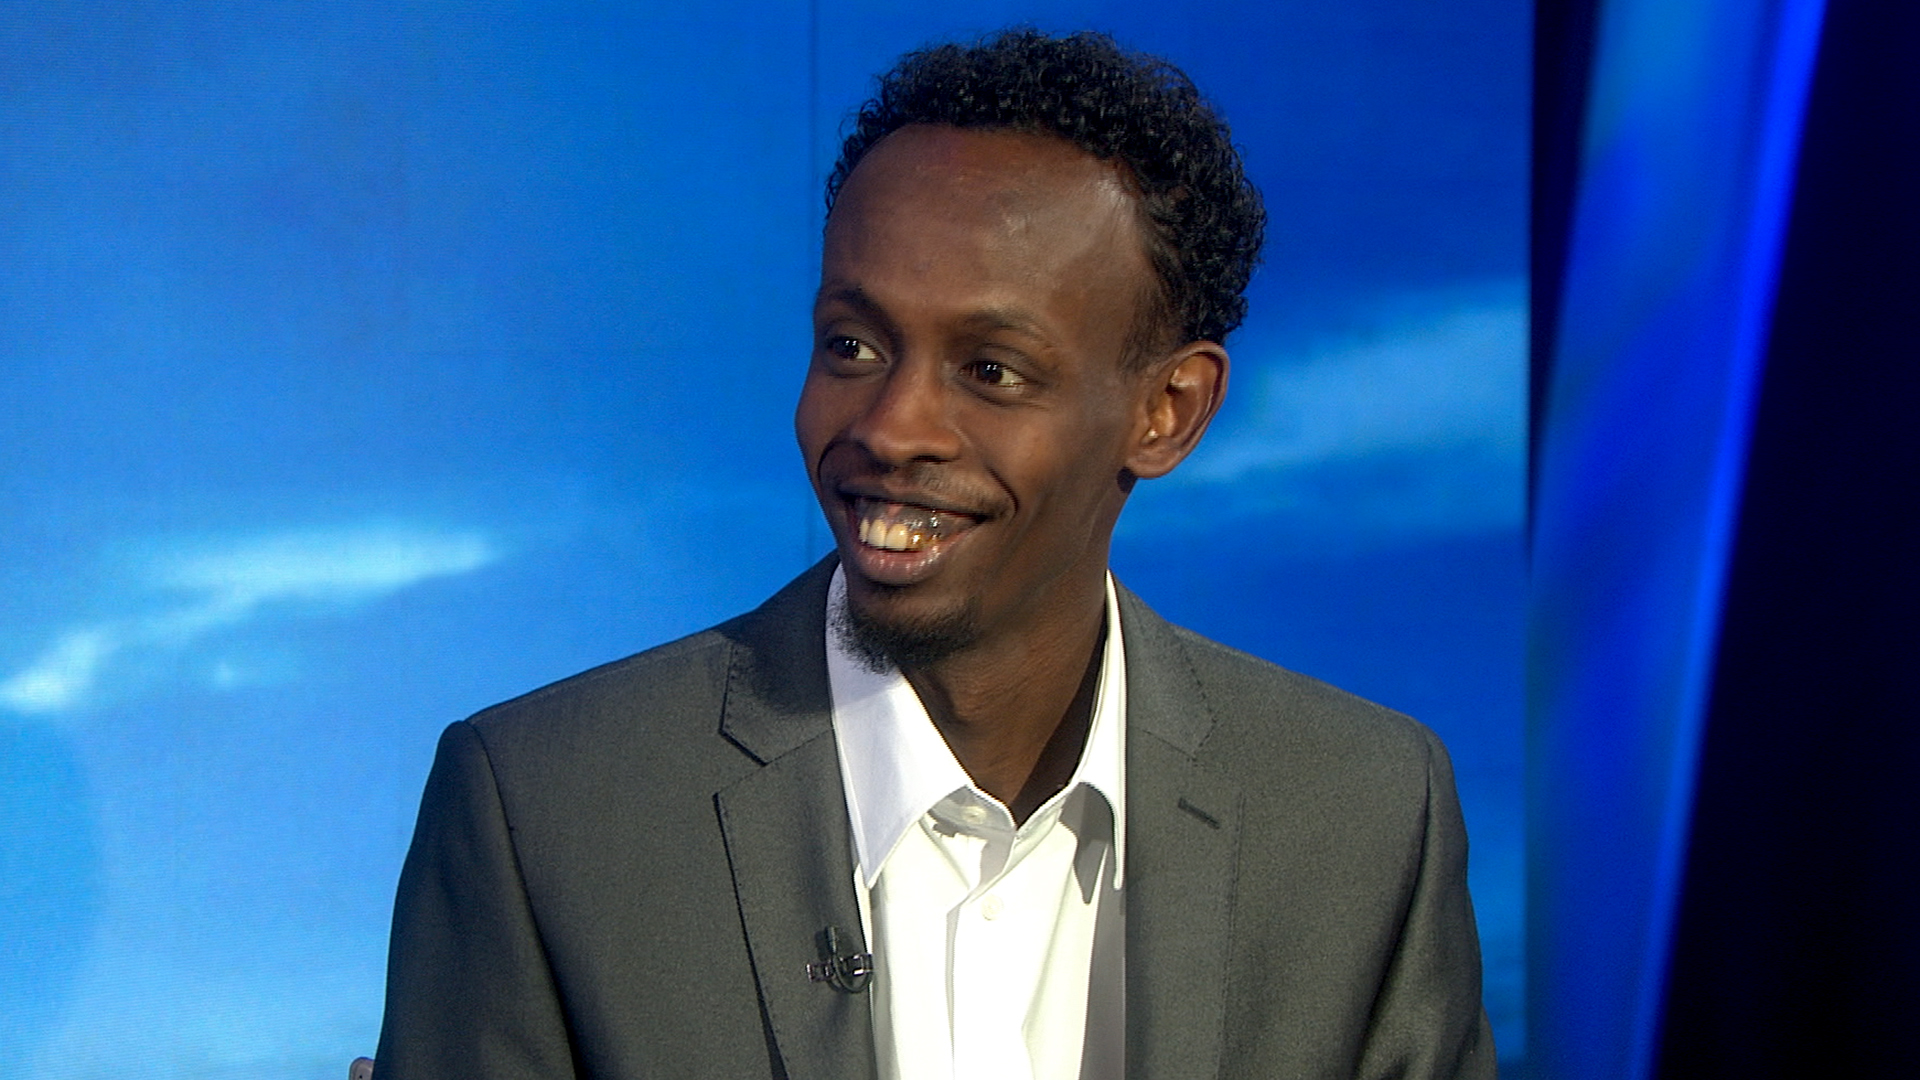 Rookie actor, limo driver Barkhad Abdi upstages Tom Hanks in